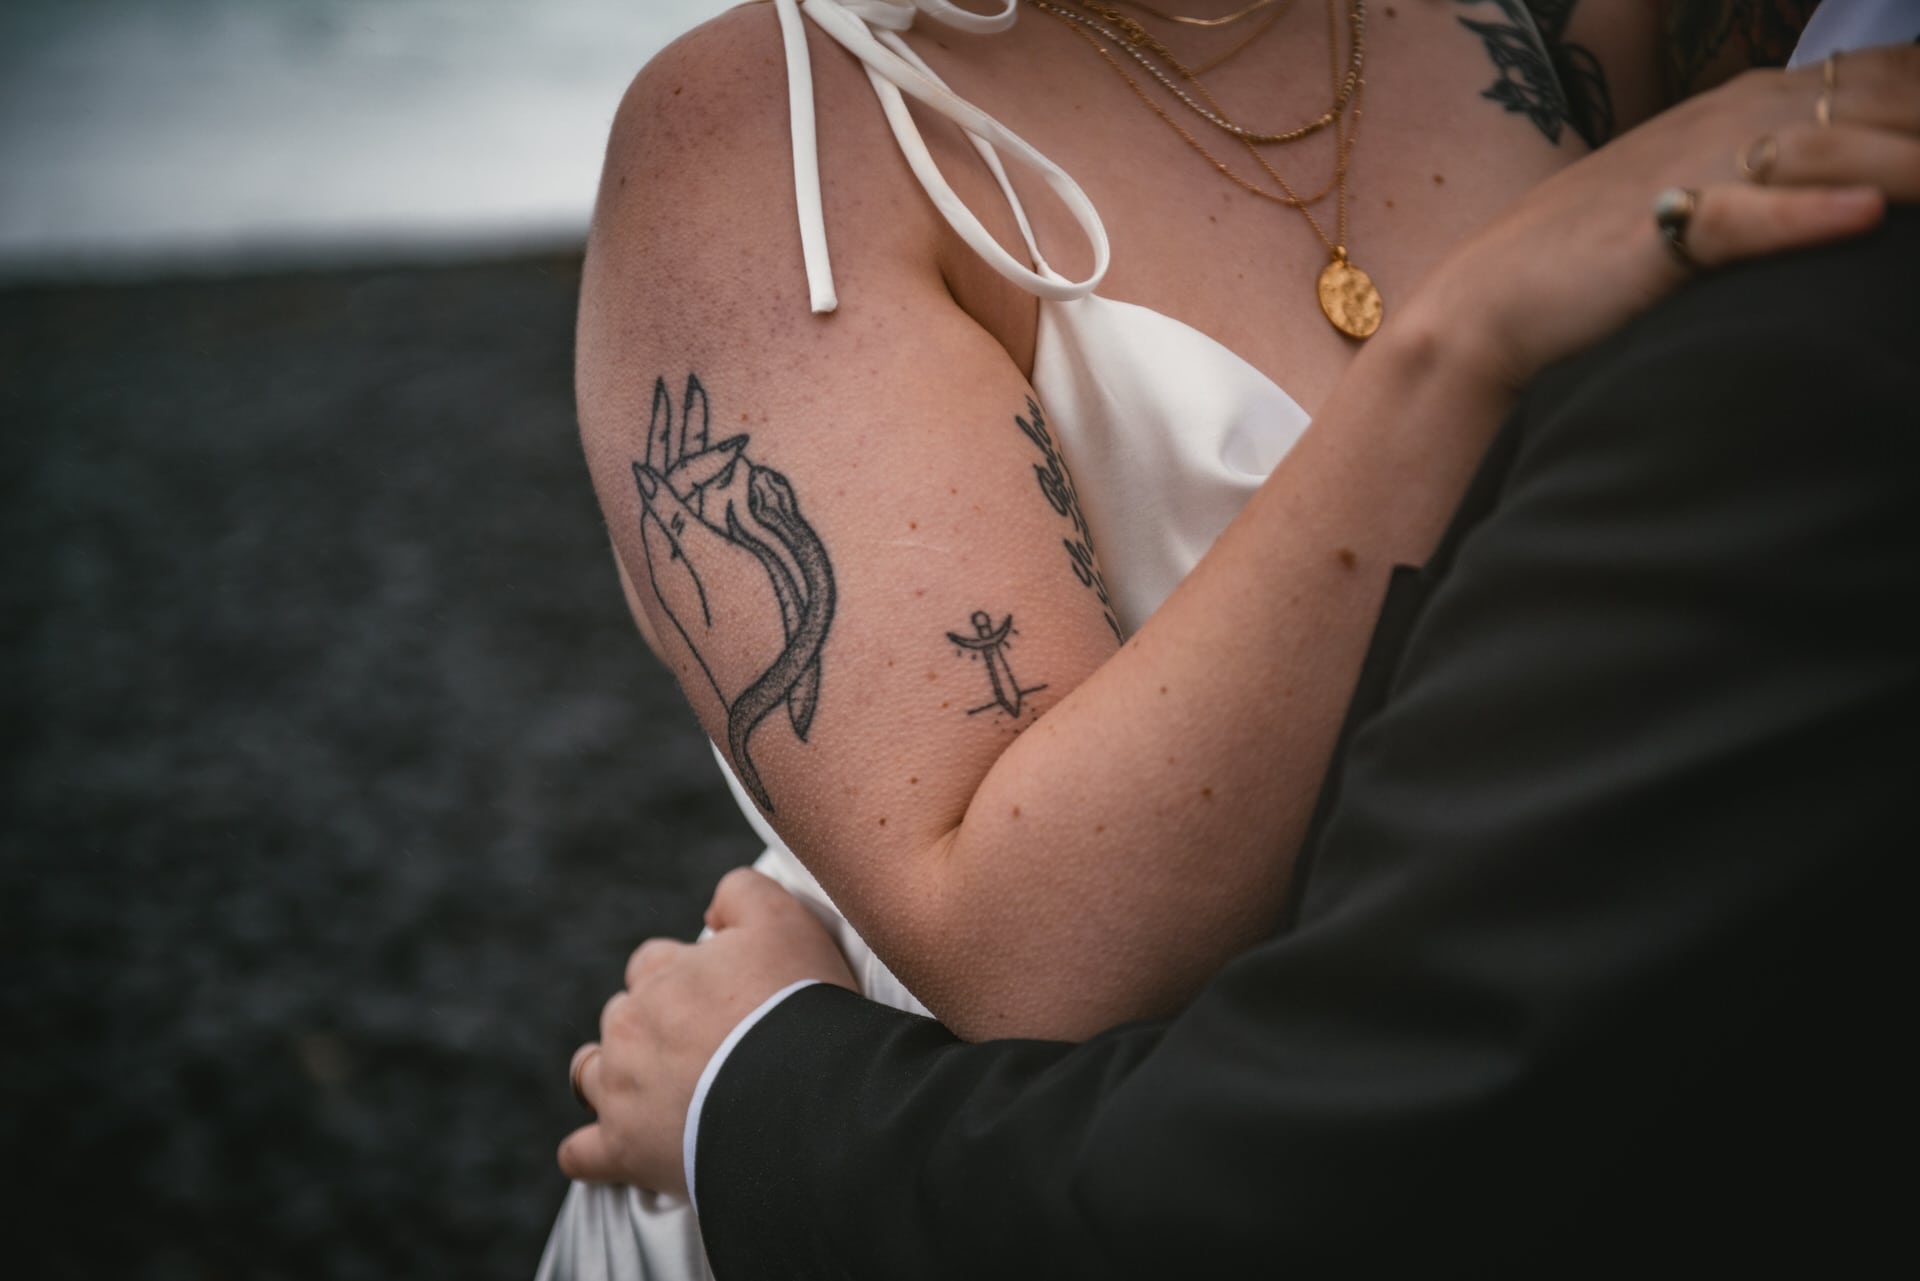 Details of the bride's arm with some old school tattoos